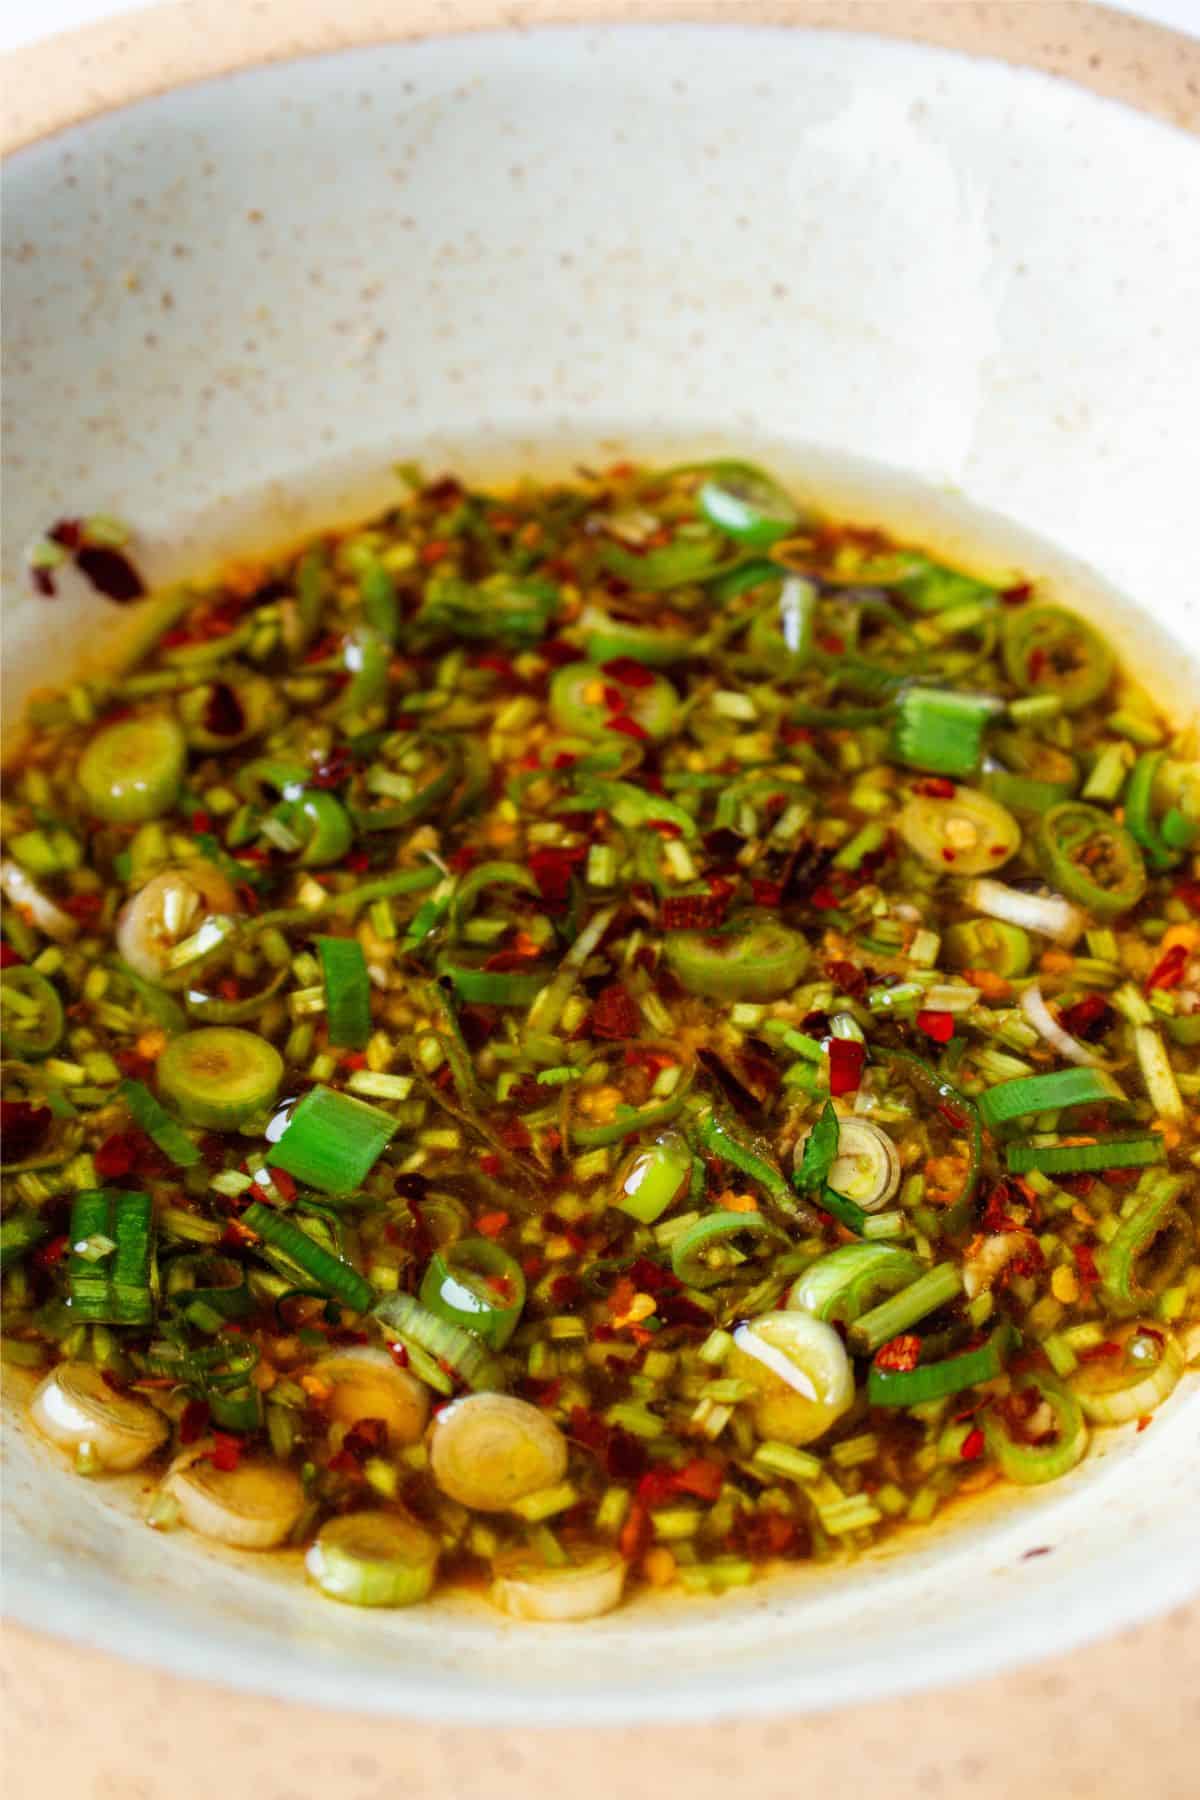 Chilli oil with sliced spring onions, chilli flakes, coriander stalks and oil in a bowl.